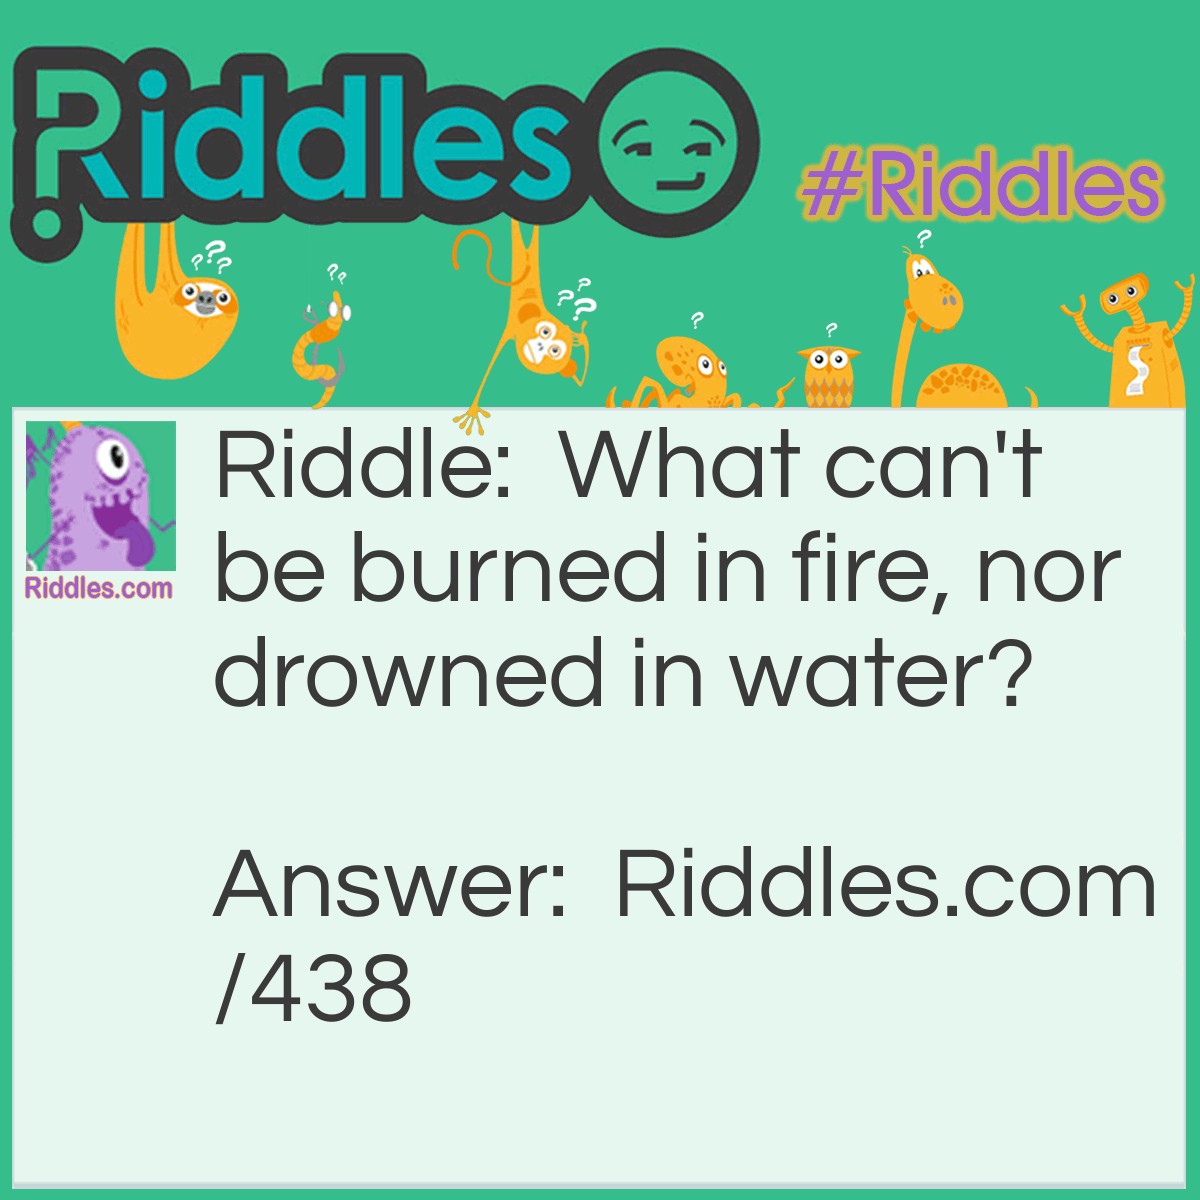 Riddle: What can't be burned in fire, nor drowned in water? Answer: Ice.